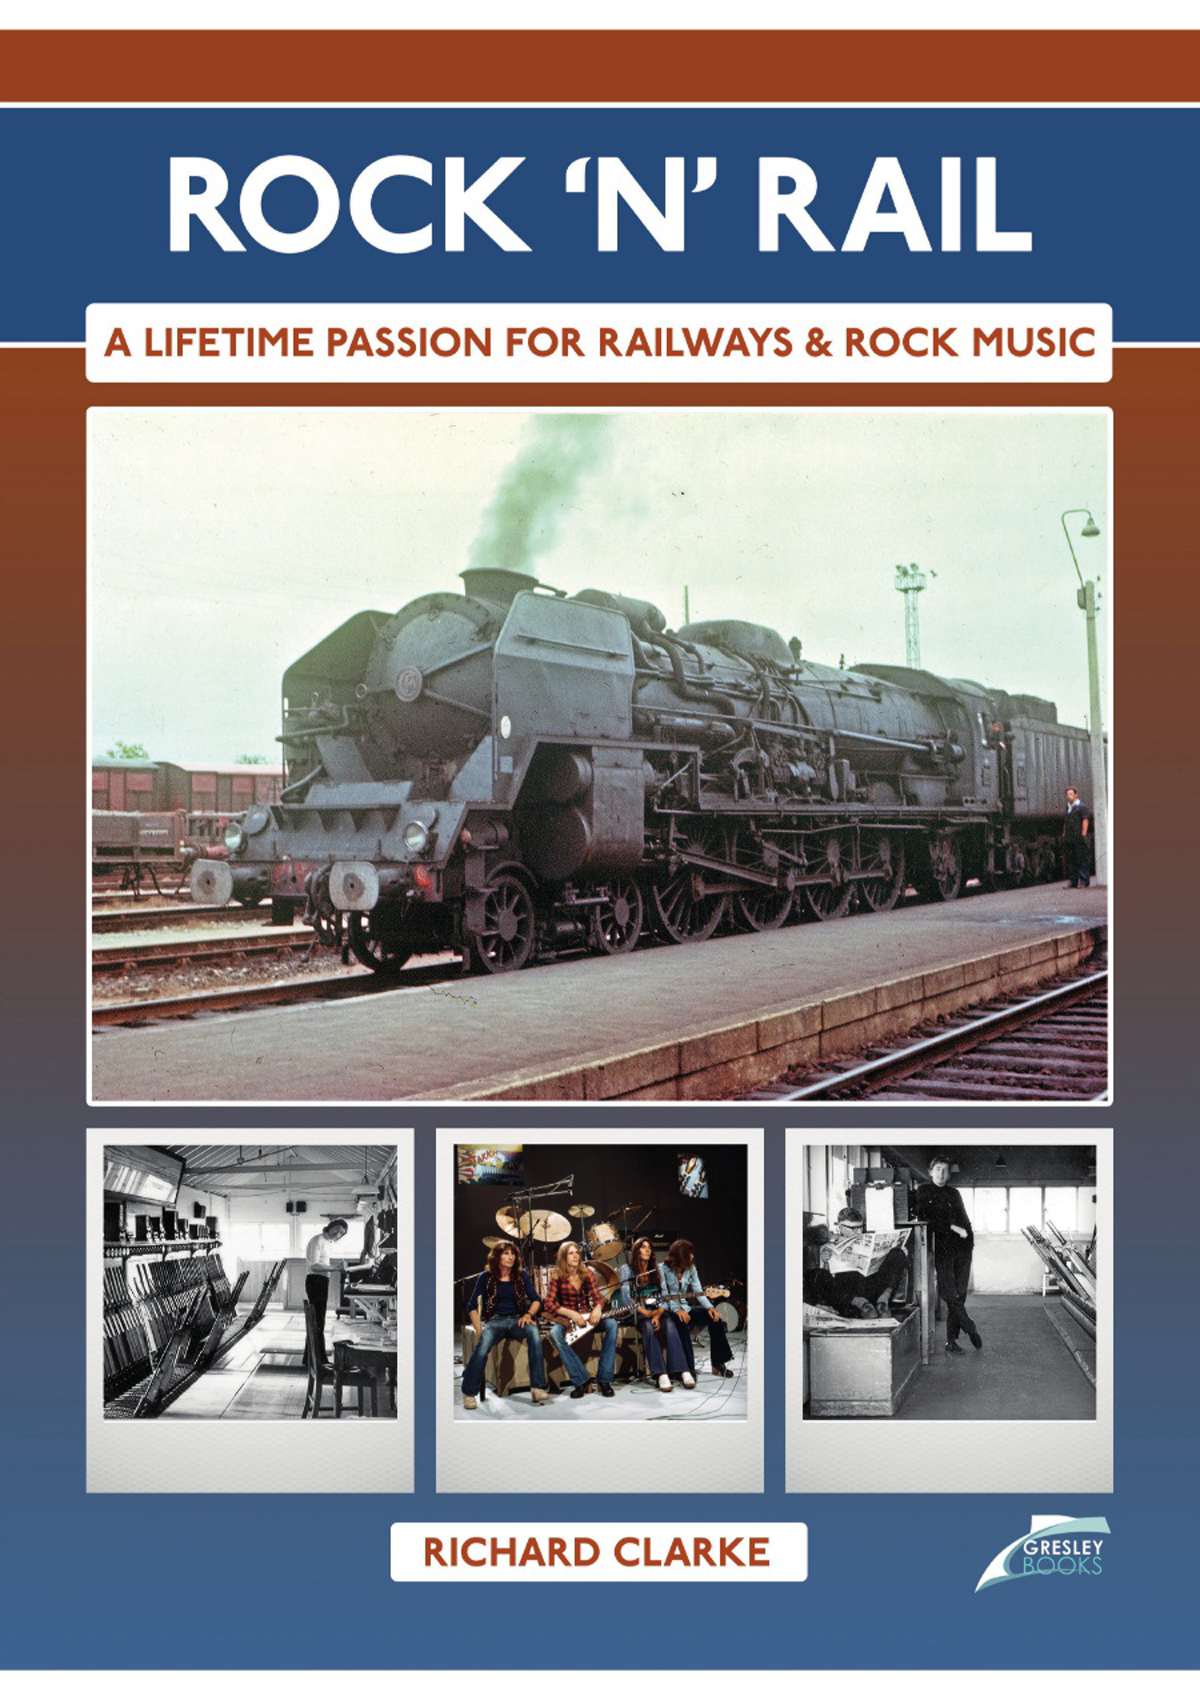 Rock 'n' Rail - A lifetime of passion for railways & rock music